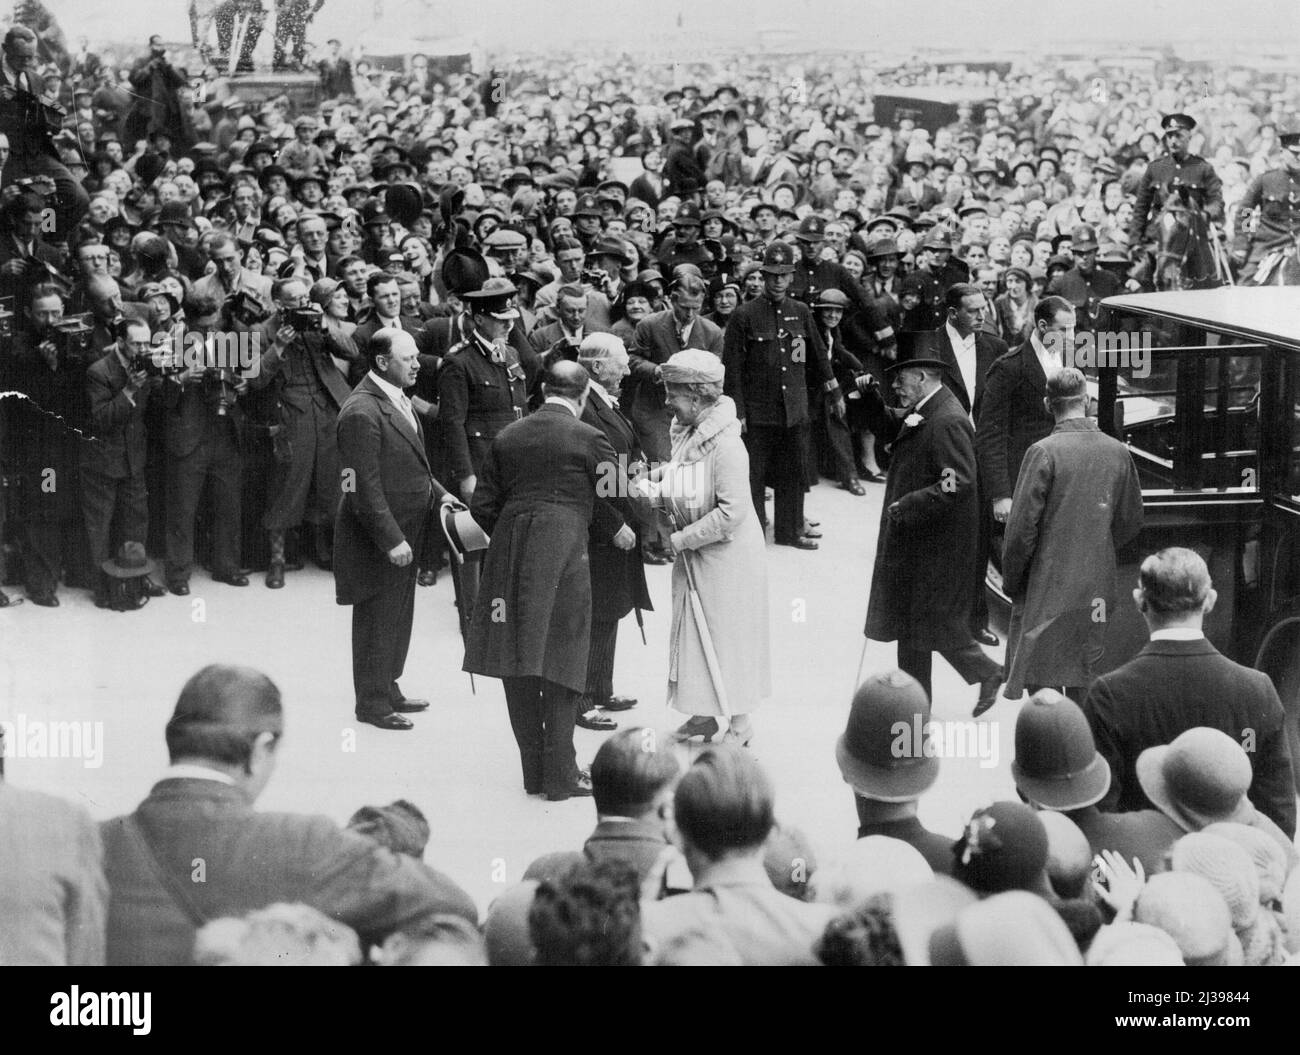 Royal Family At Epsom -- Their majesties the king and Queen arriving. The  king and Queen